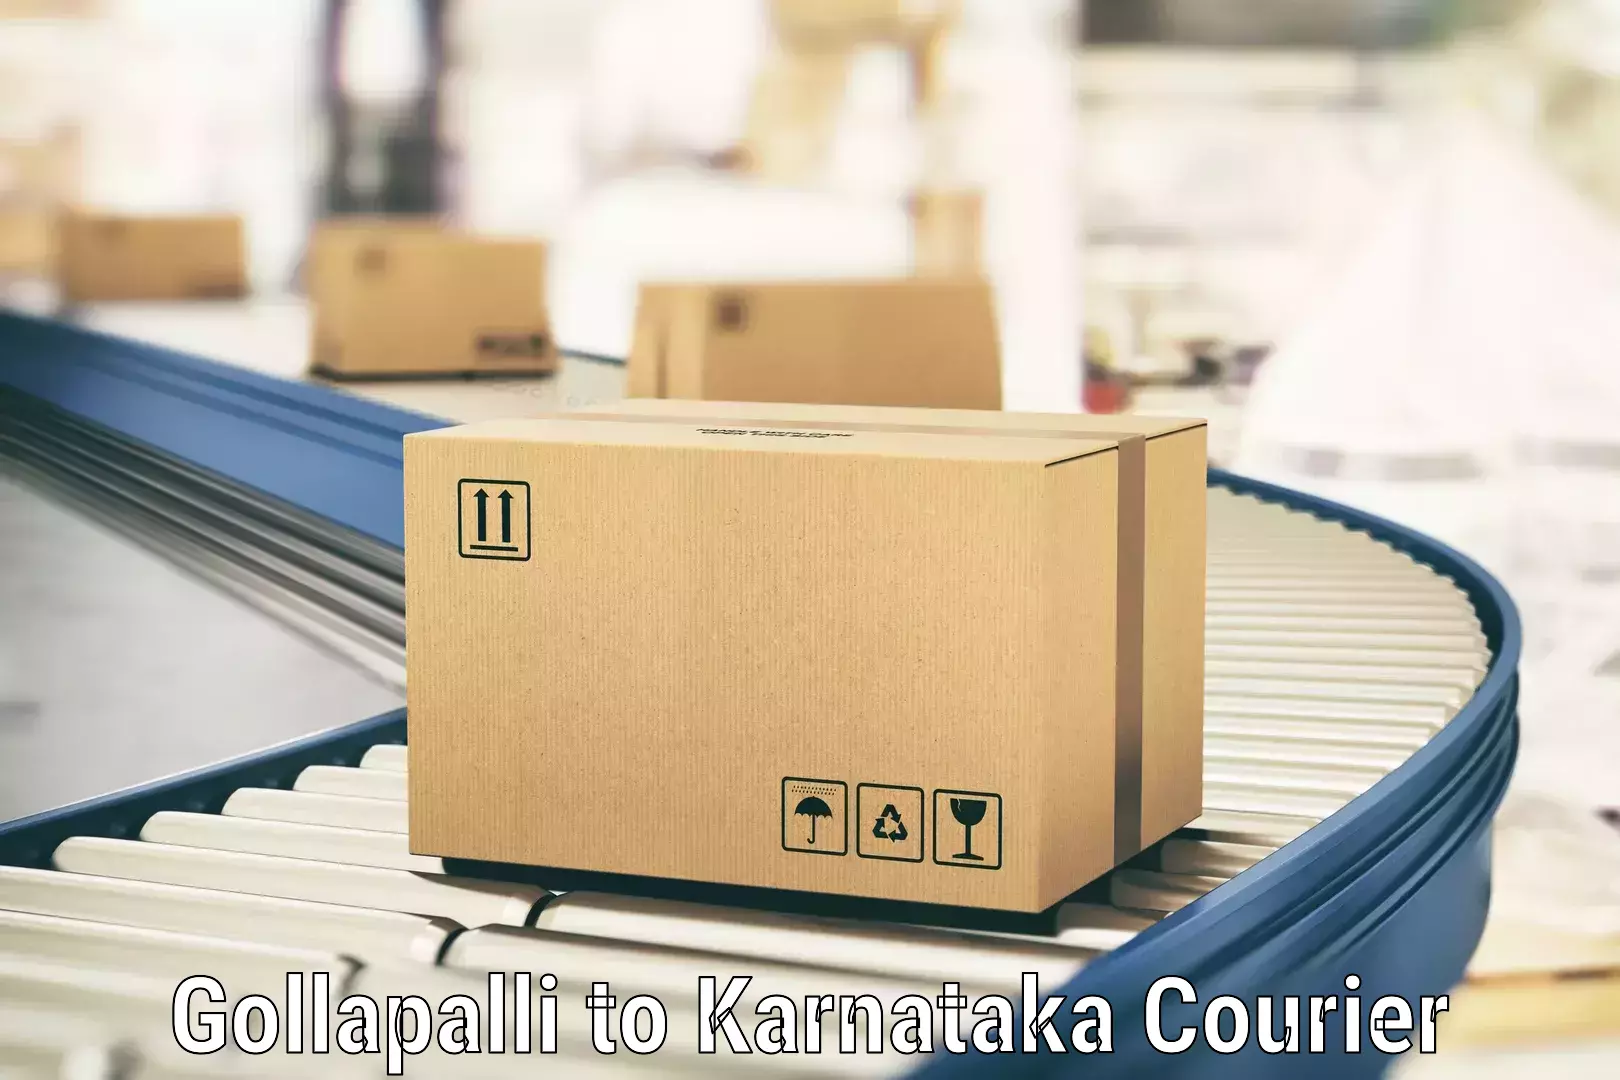 Flexible delivery schedules Gollapalli to NITTE Mangaluru